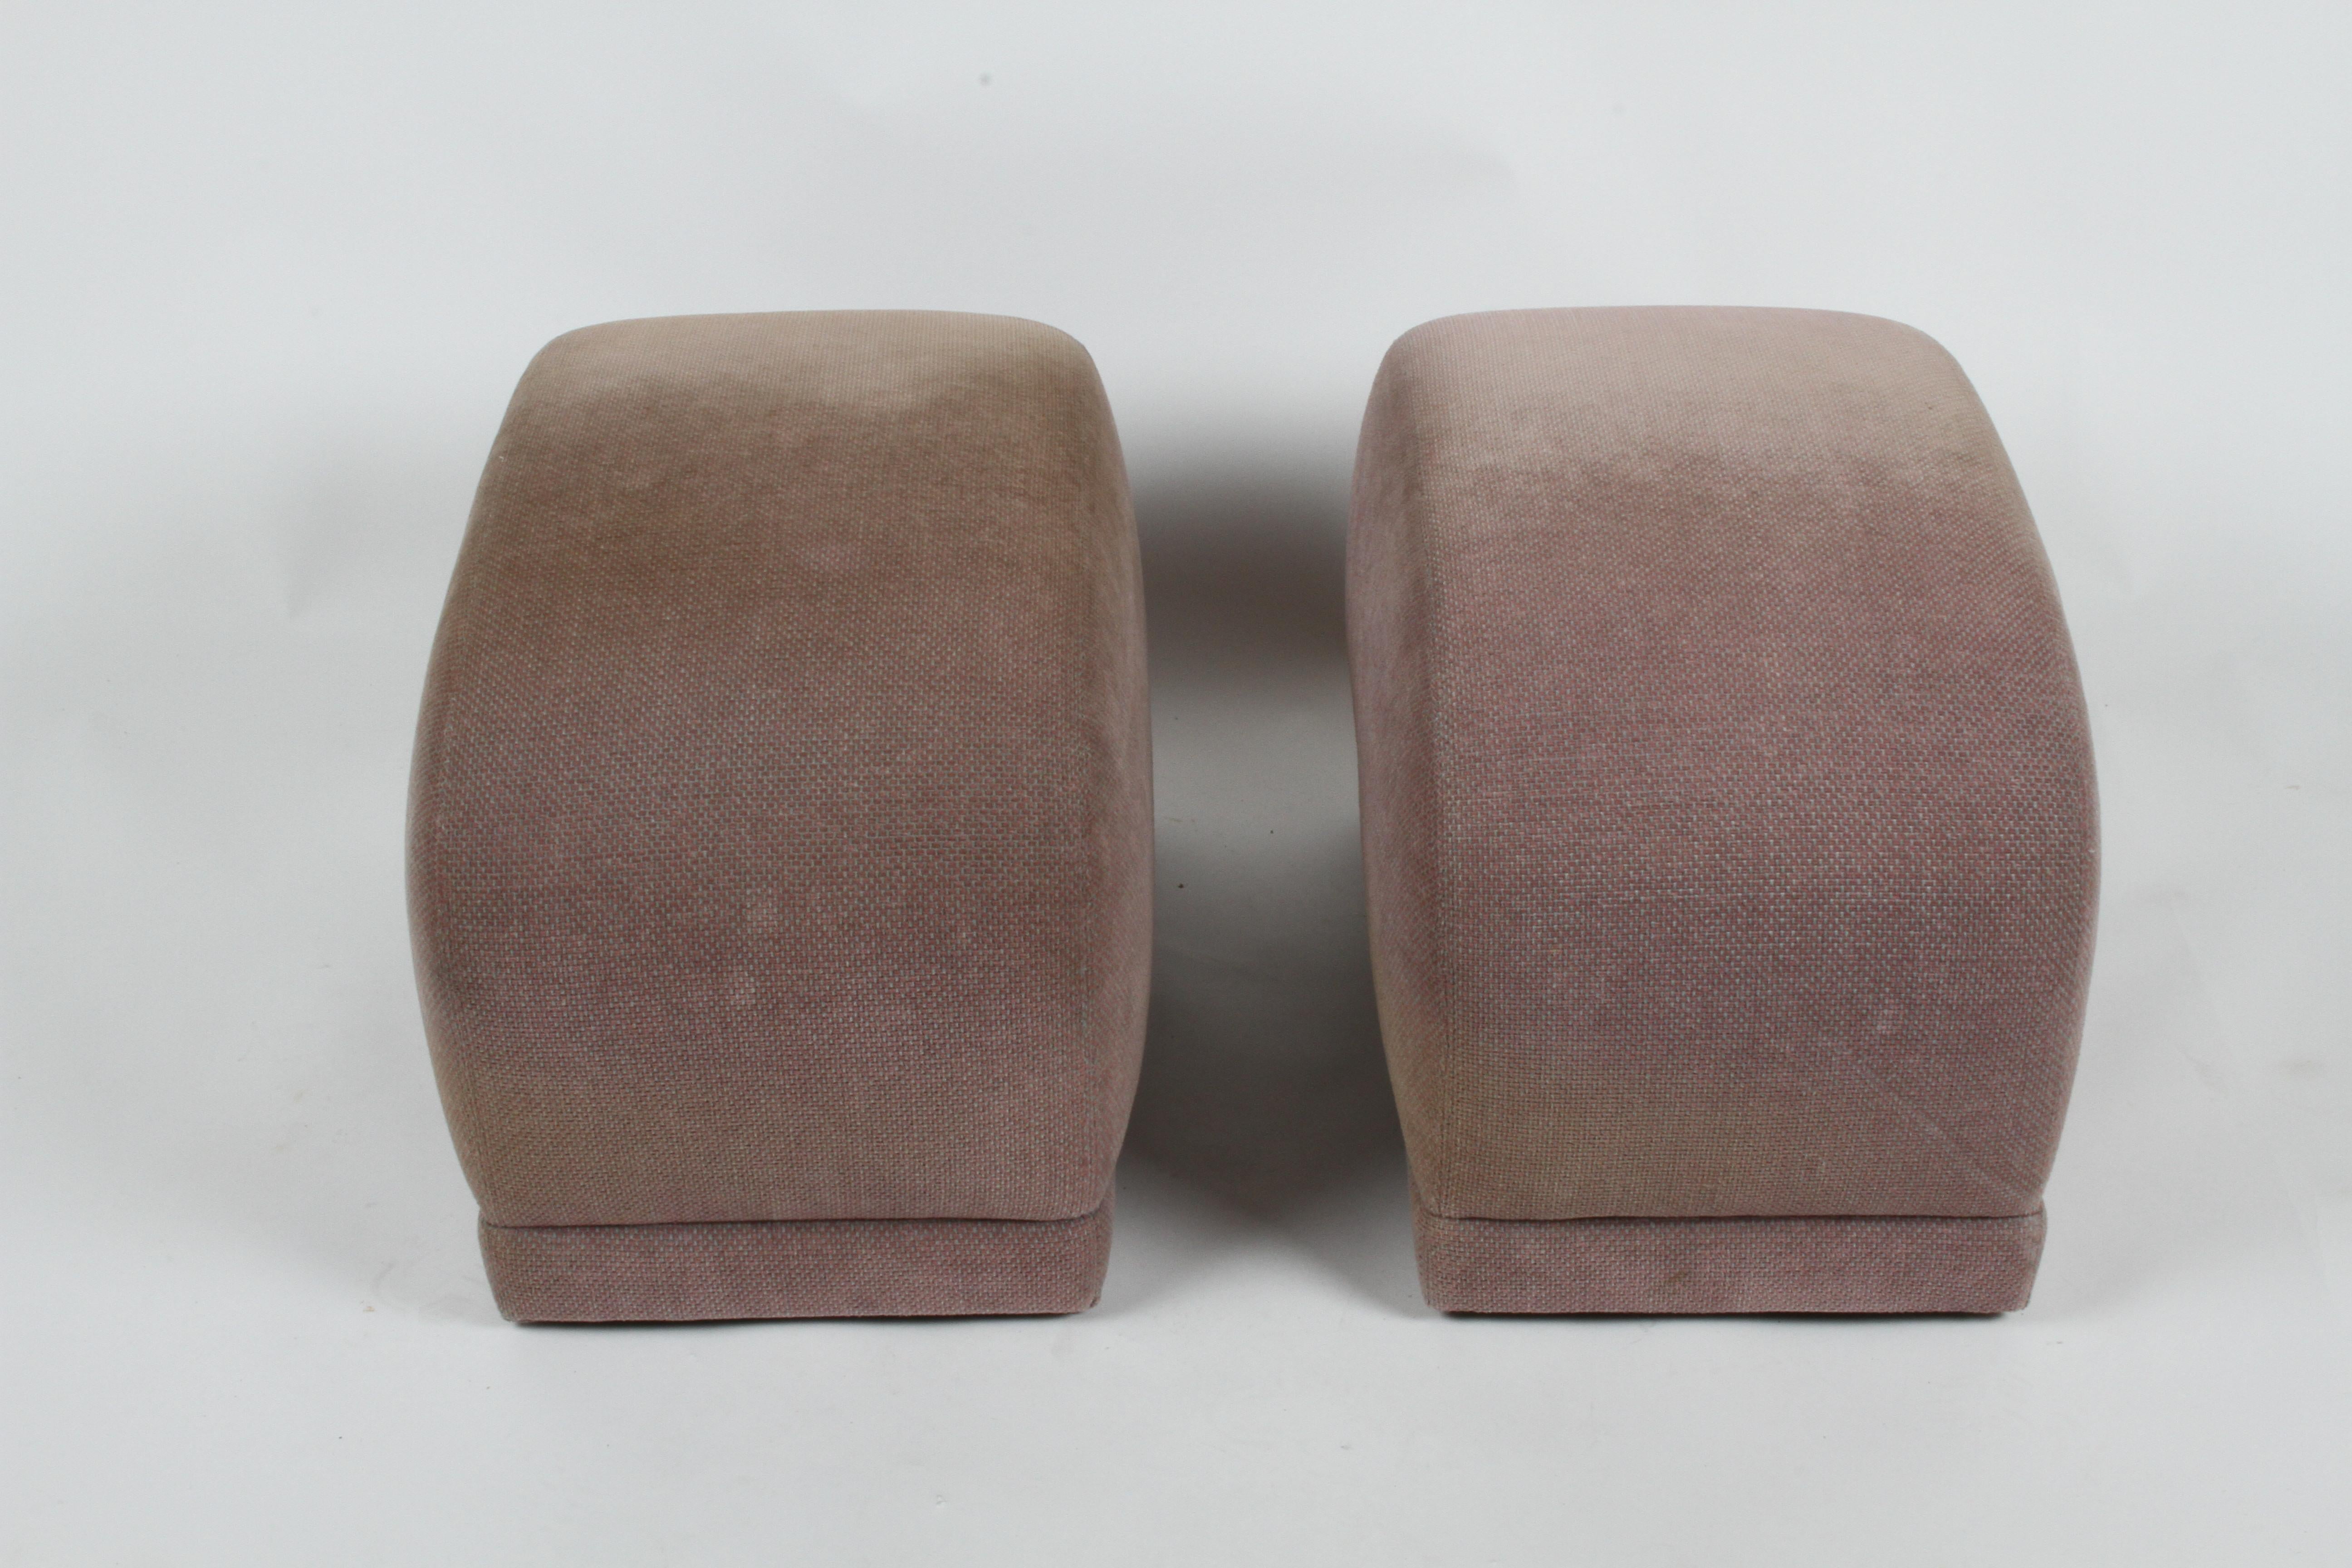 Late 20th Century Pair of 1980's Upholstered Poufs or Ottomans on Castors, Style of Milo Baughman